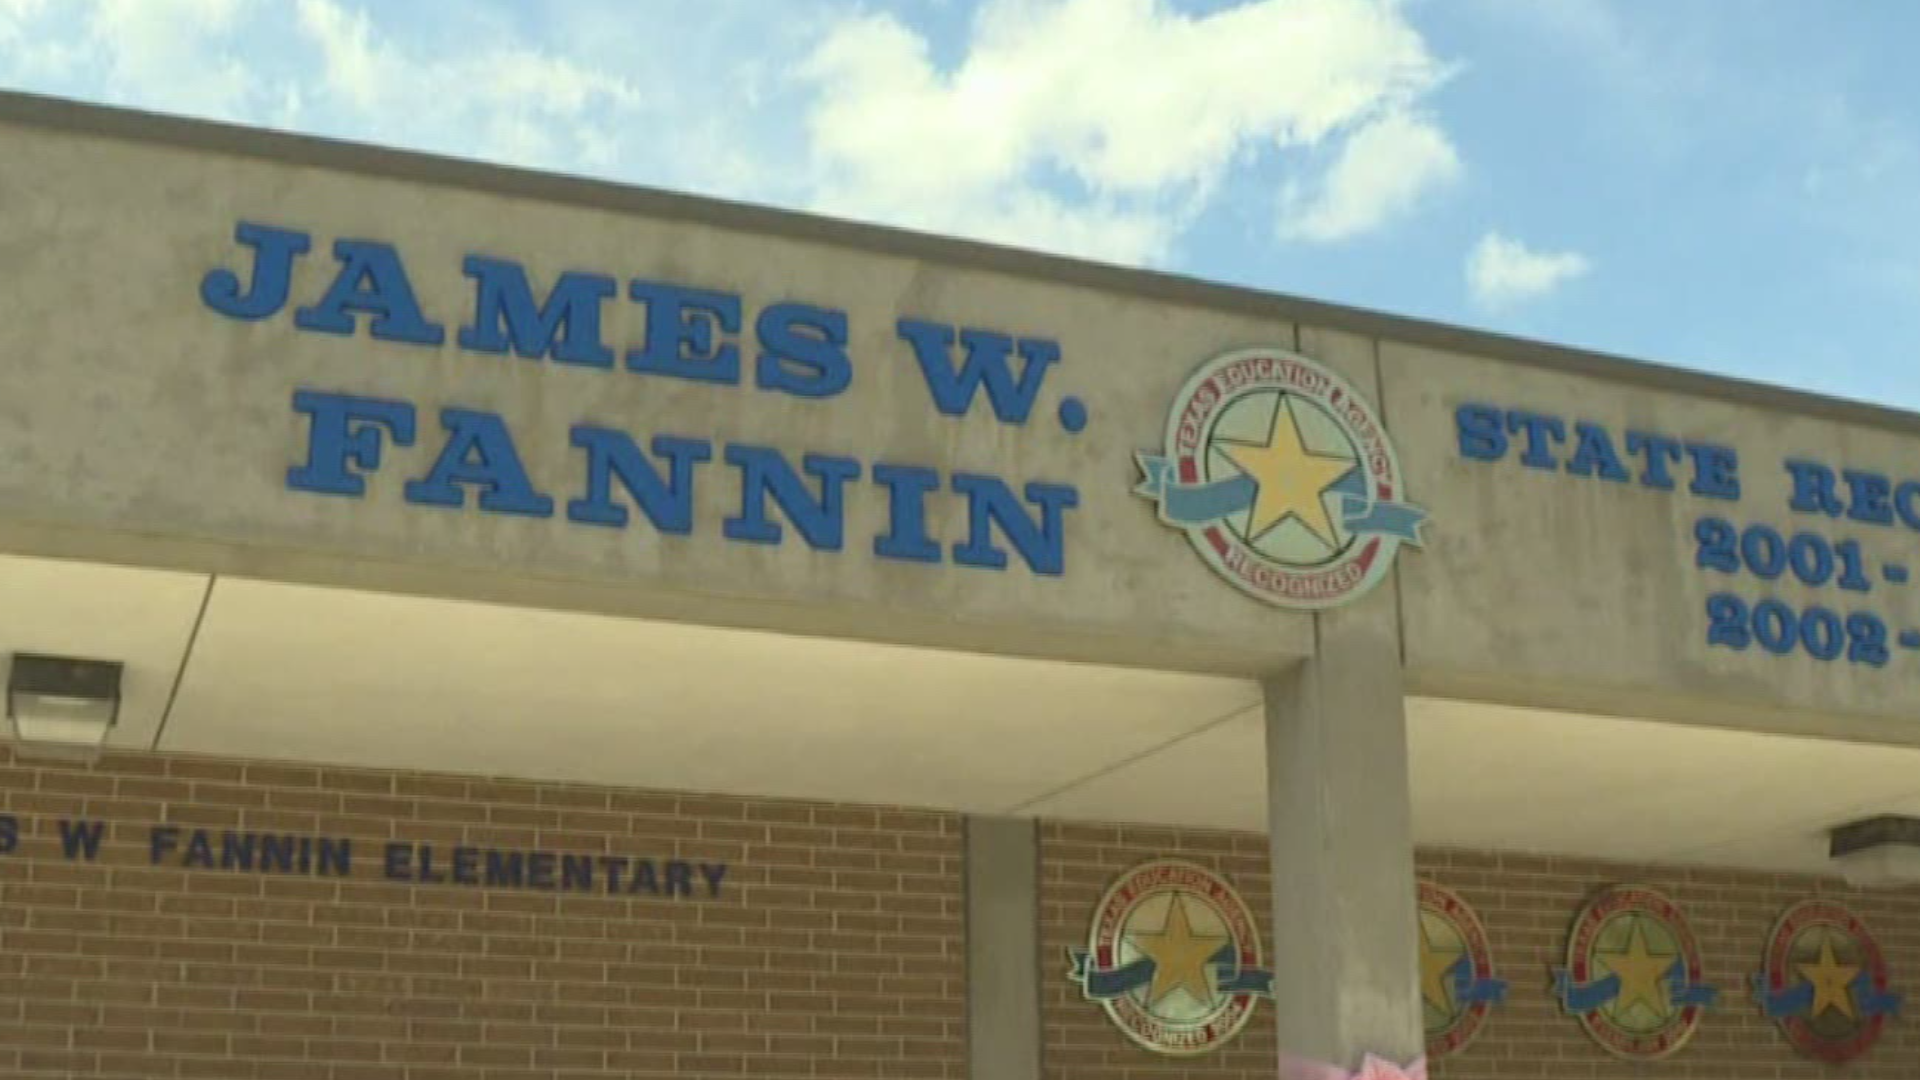 Administrators at Fannin Elementary School say they have counselors on hand to help students that may have been impacted by the shooting.